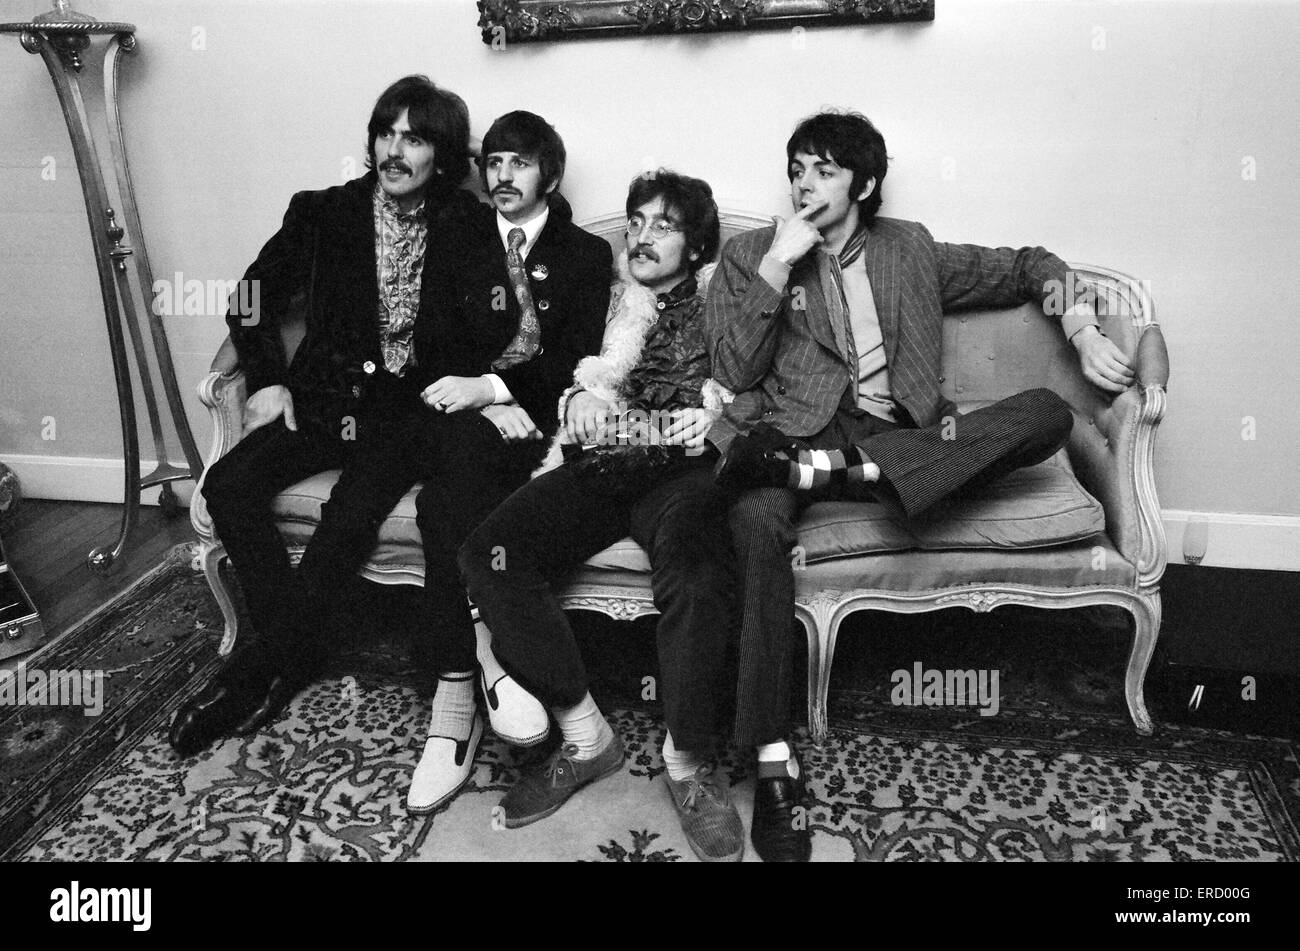 The Beatles, press launch of new album, 'Sgt. Pepper's Lonely Hearts Club Band' their eighth studio album, in the drawing room at 24 Chapel Street, Belgravia London, 19th May 1967. George Harrison, Ringo Starr, John Lennon, Paul McCartney. Stock Photo